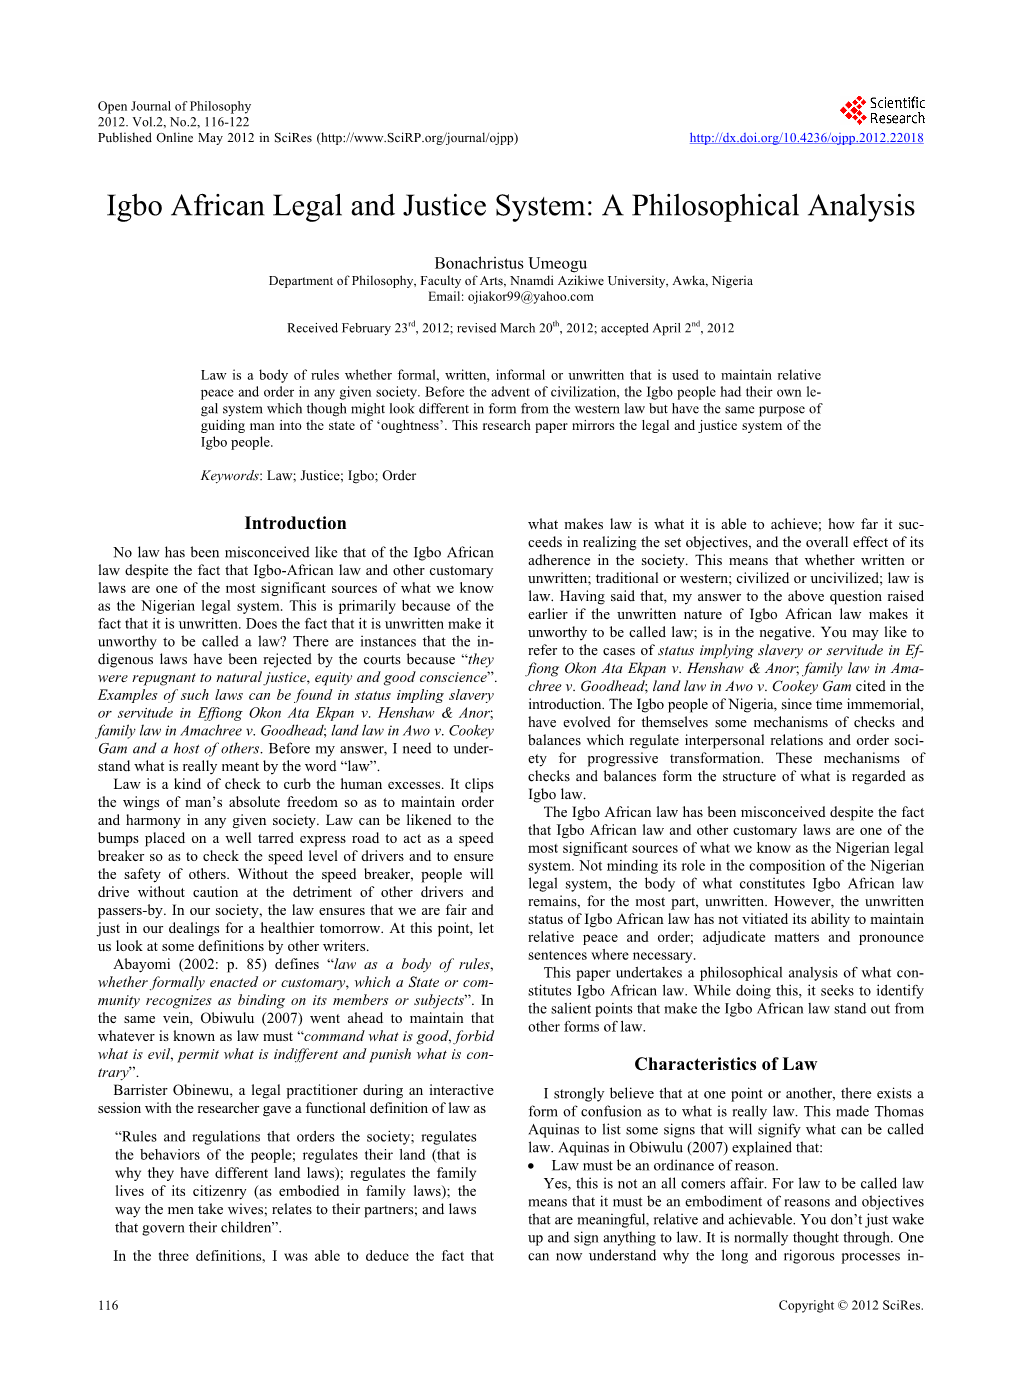 Igbo African Legal and Justice System a Philosophical Analysis